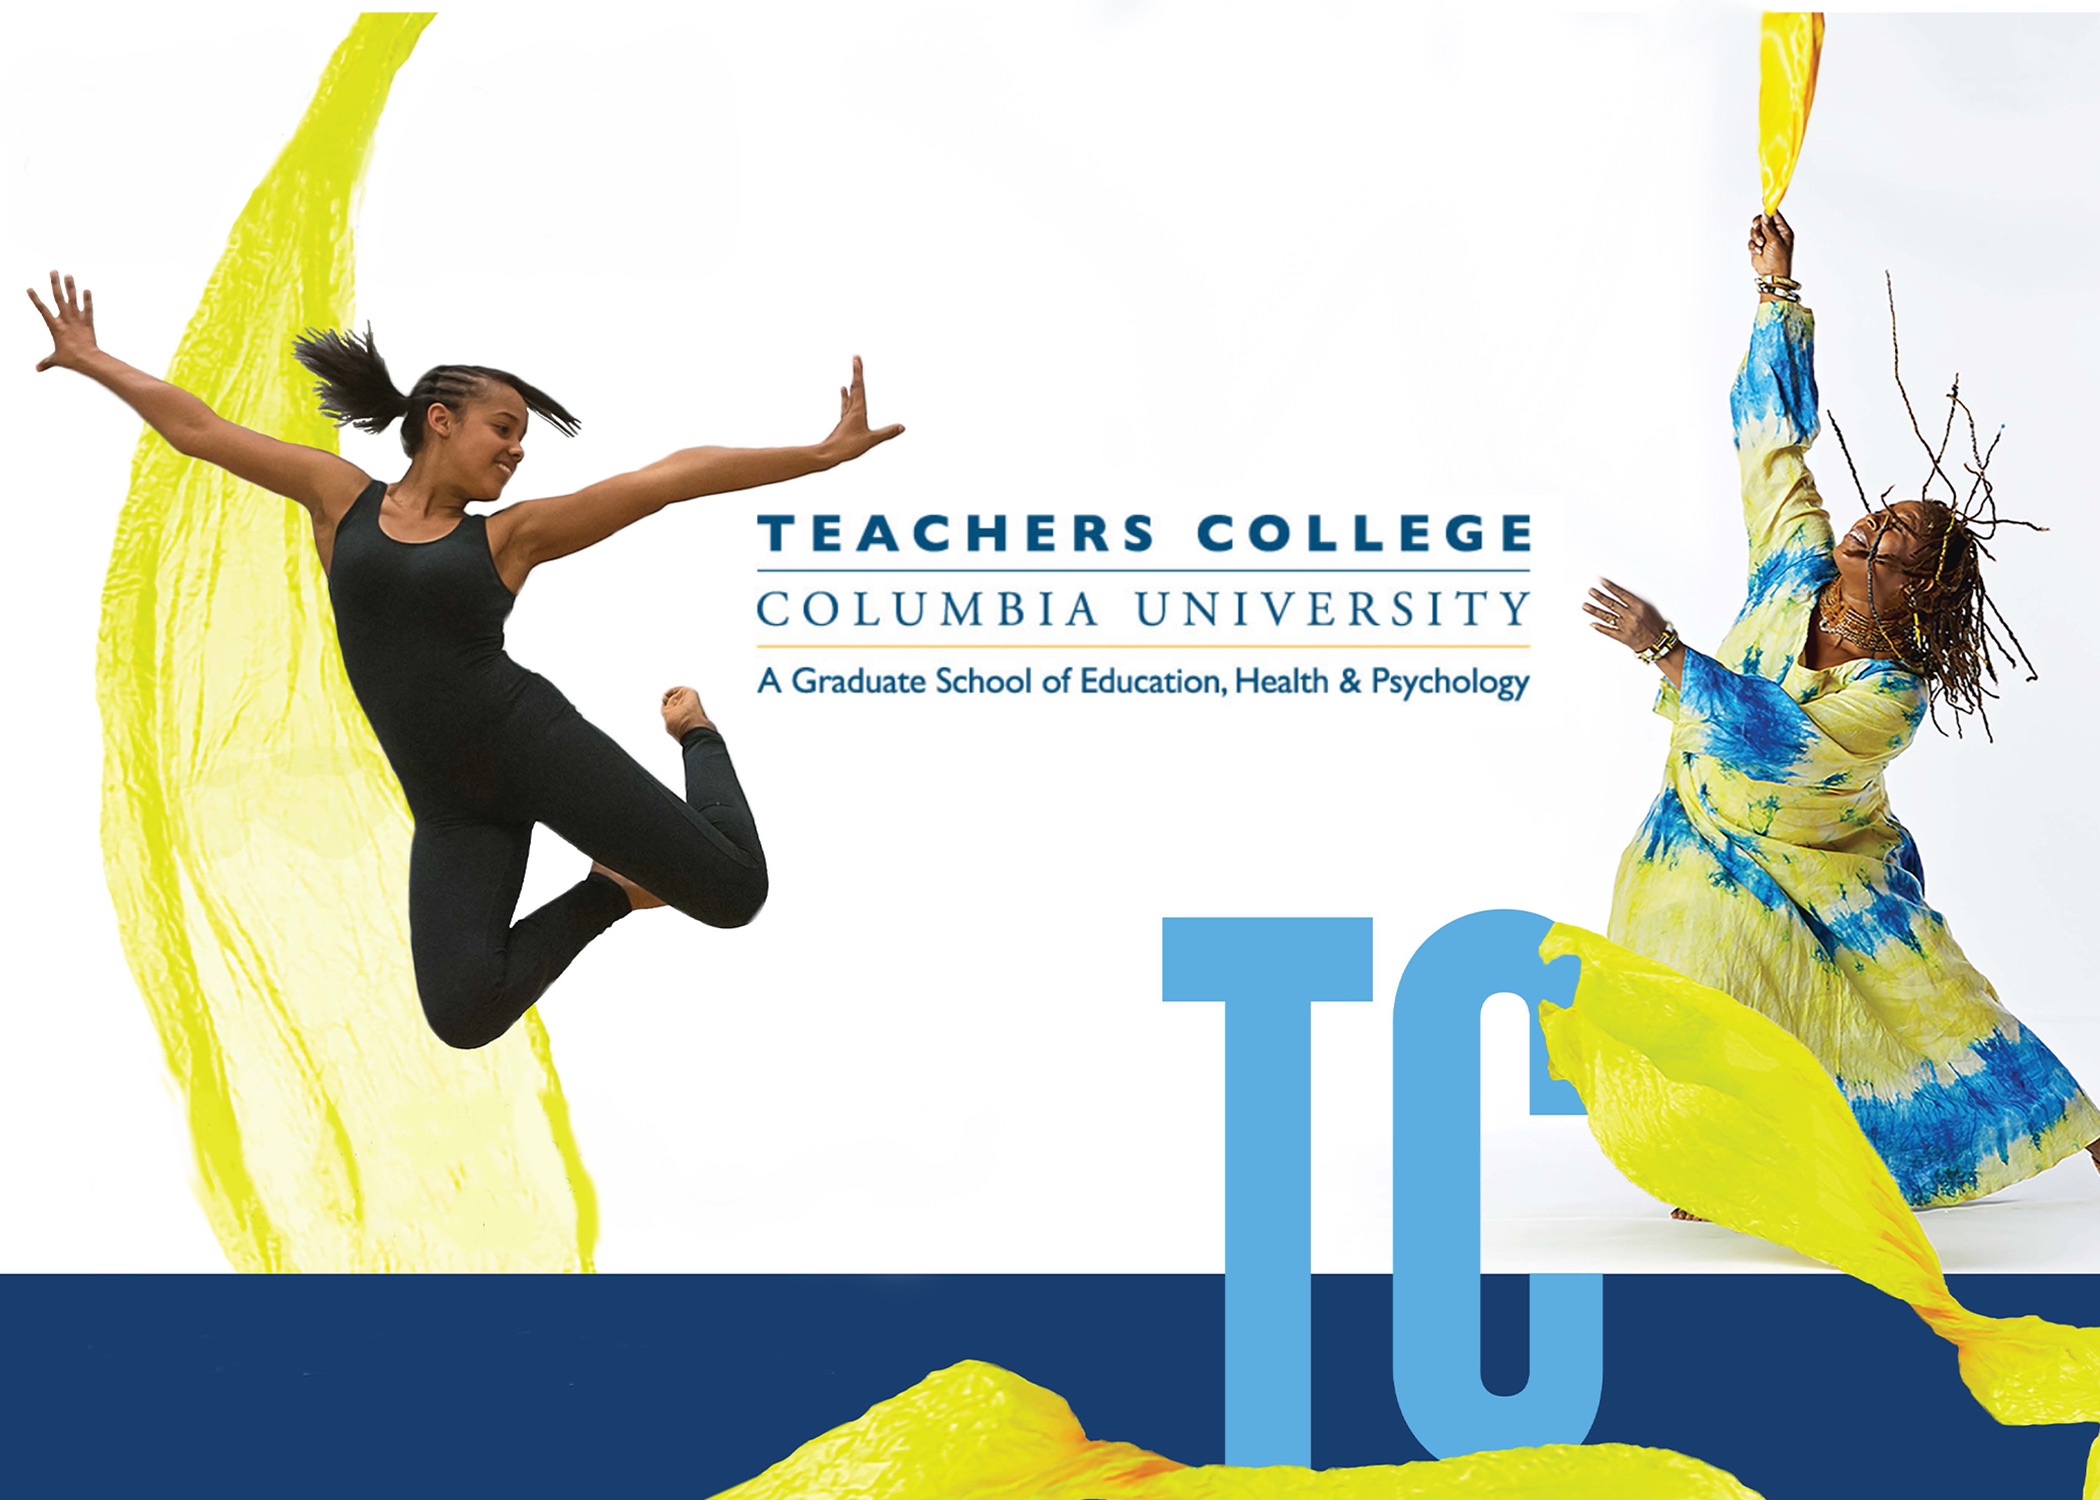 Dance Education Program, Arnhold Institute promotional banner featuring two dancers